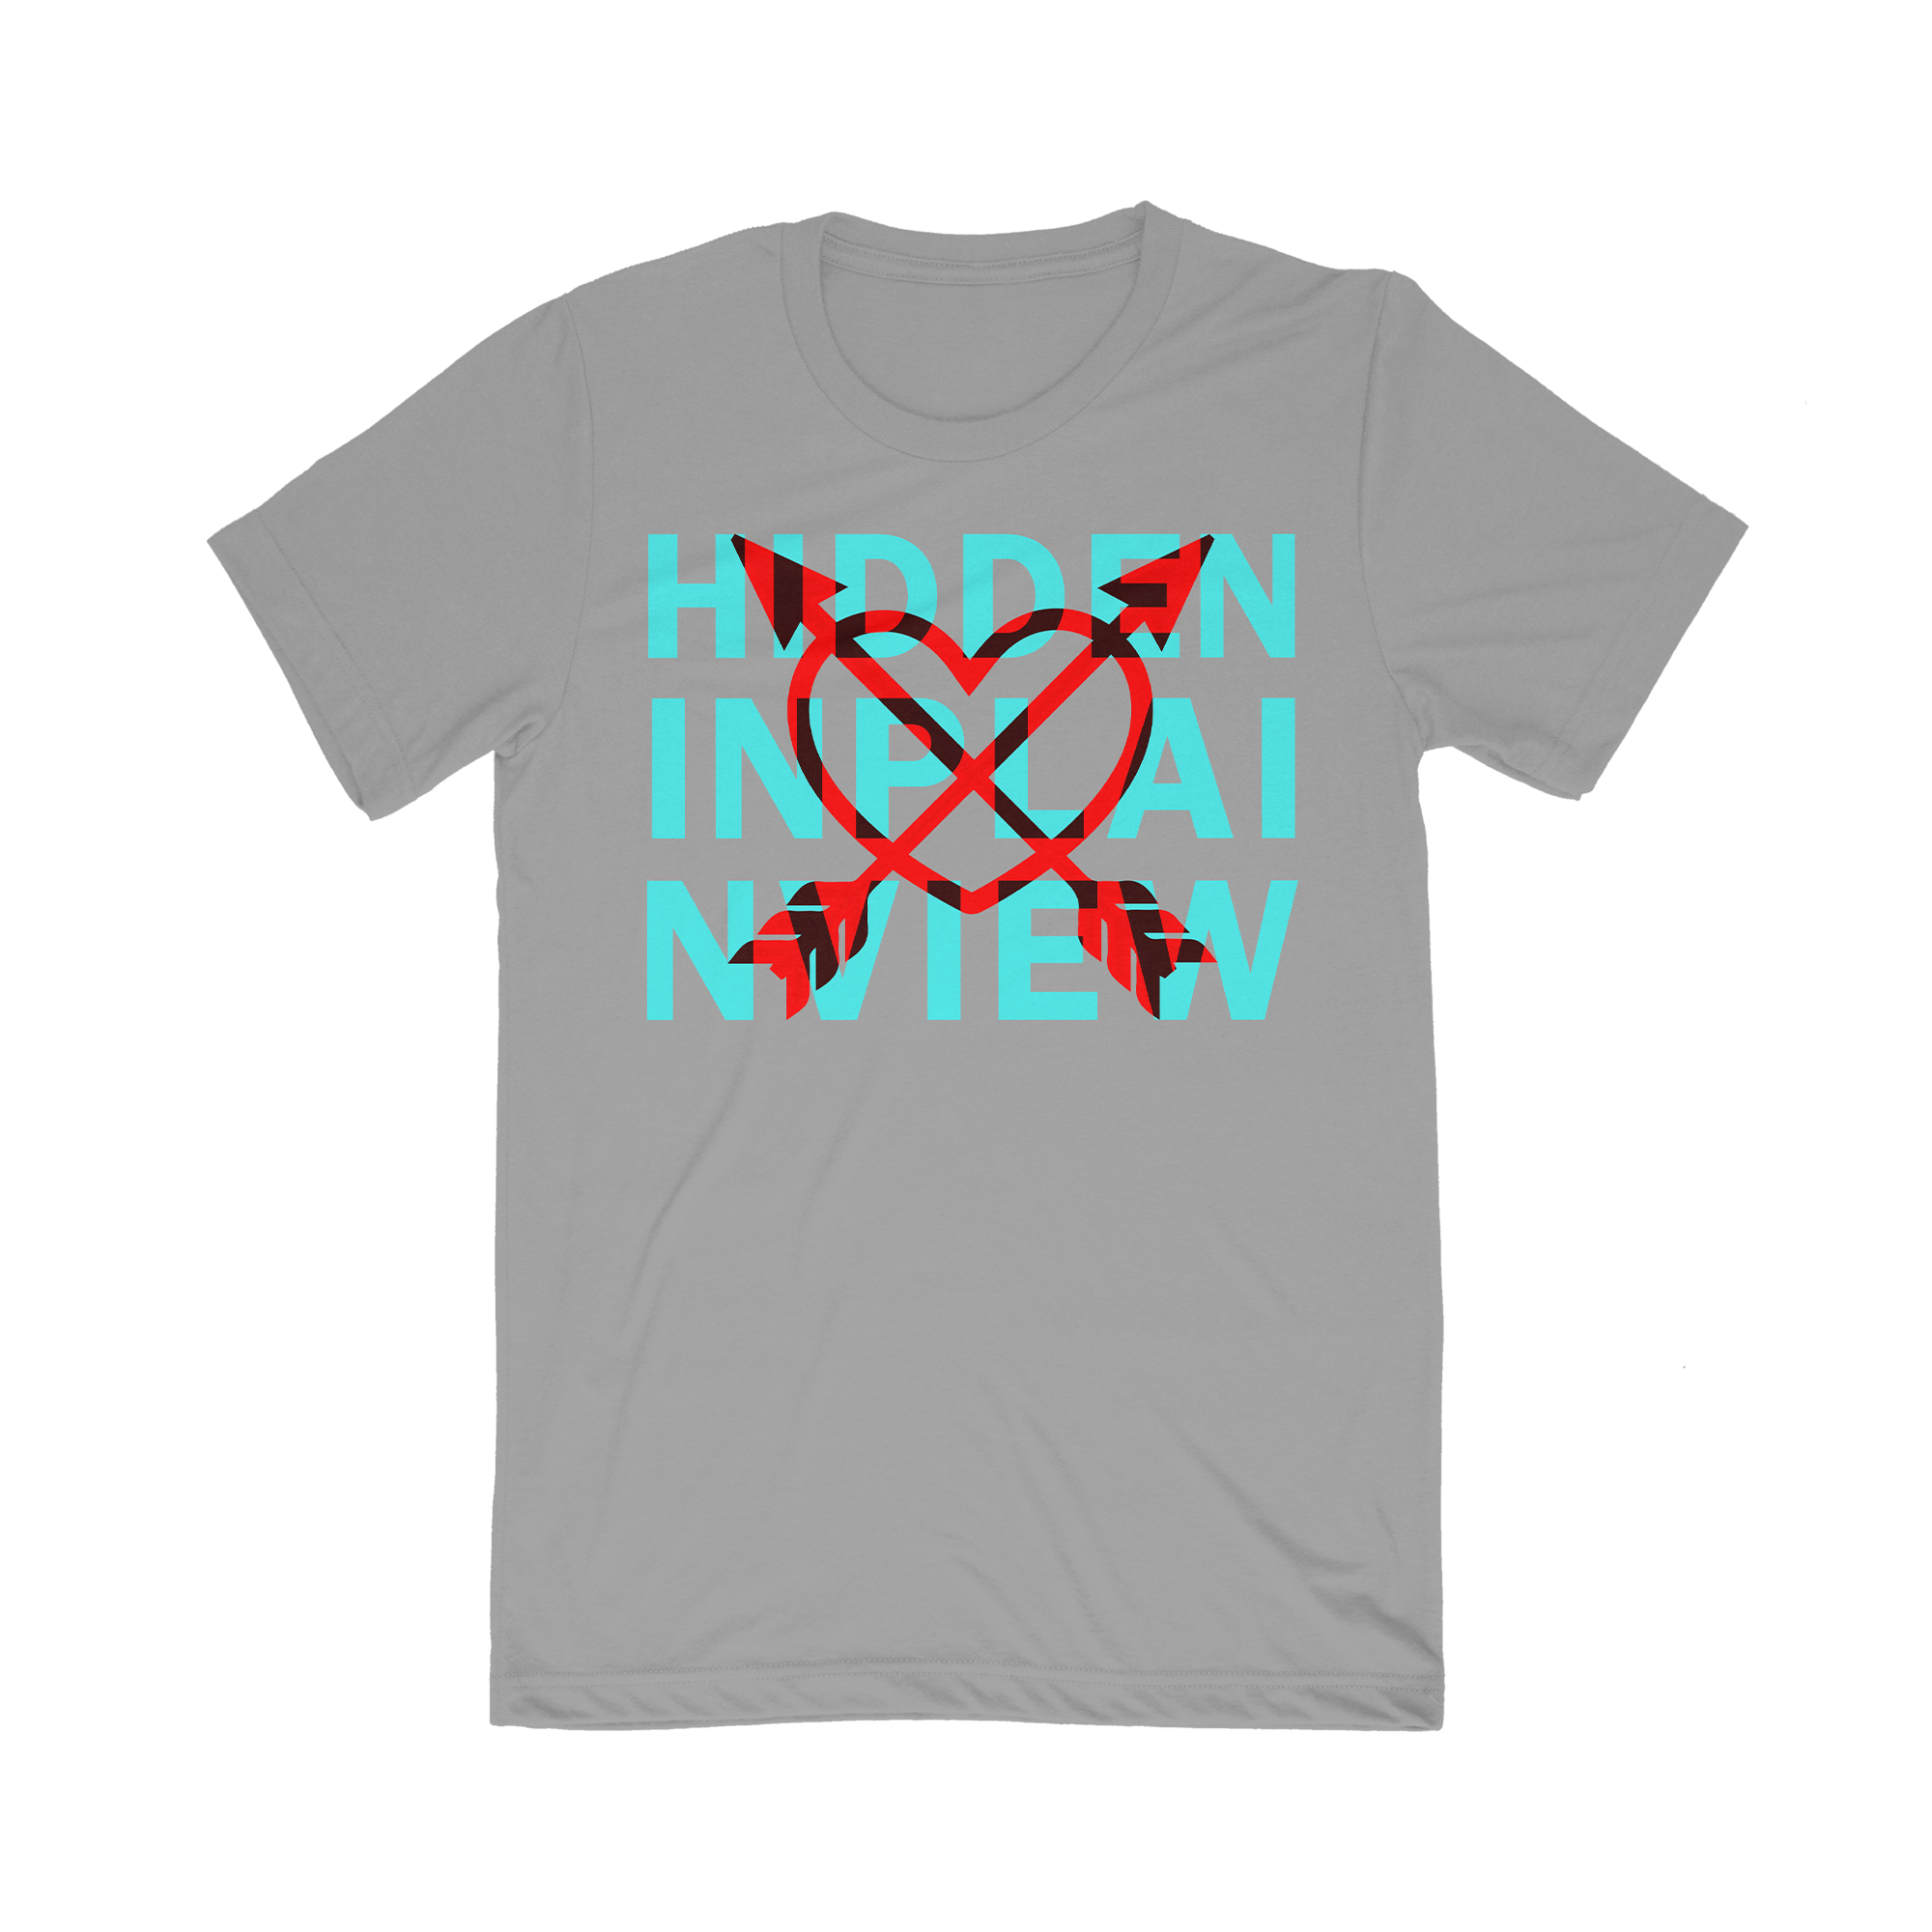 Hidden In Plain View - Hearts and Arrows Tee